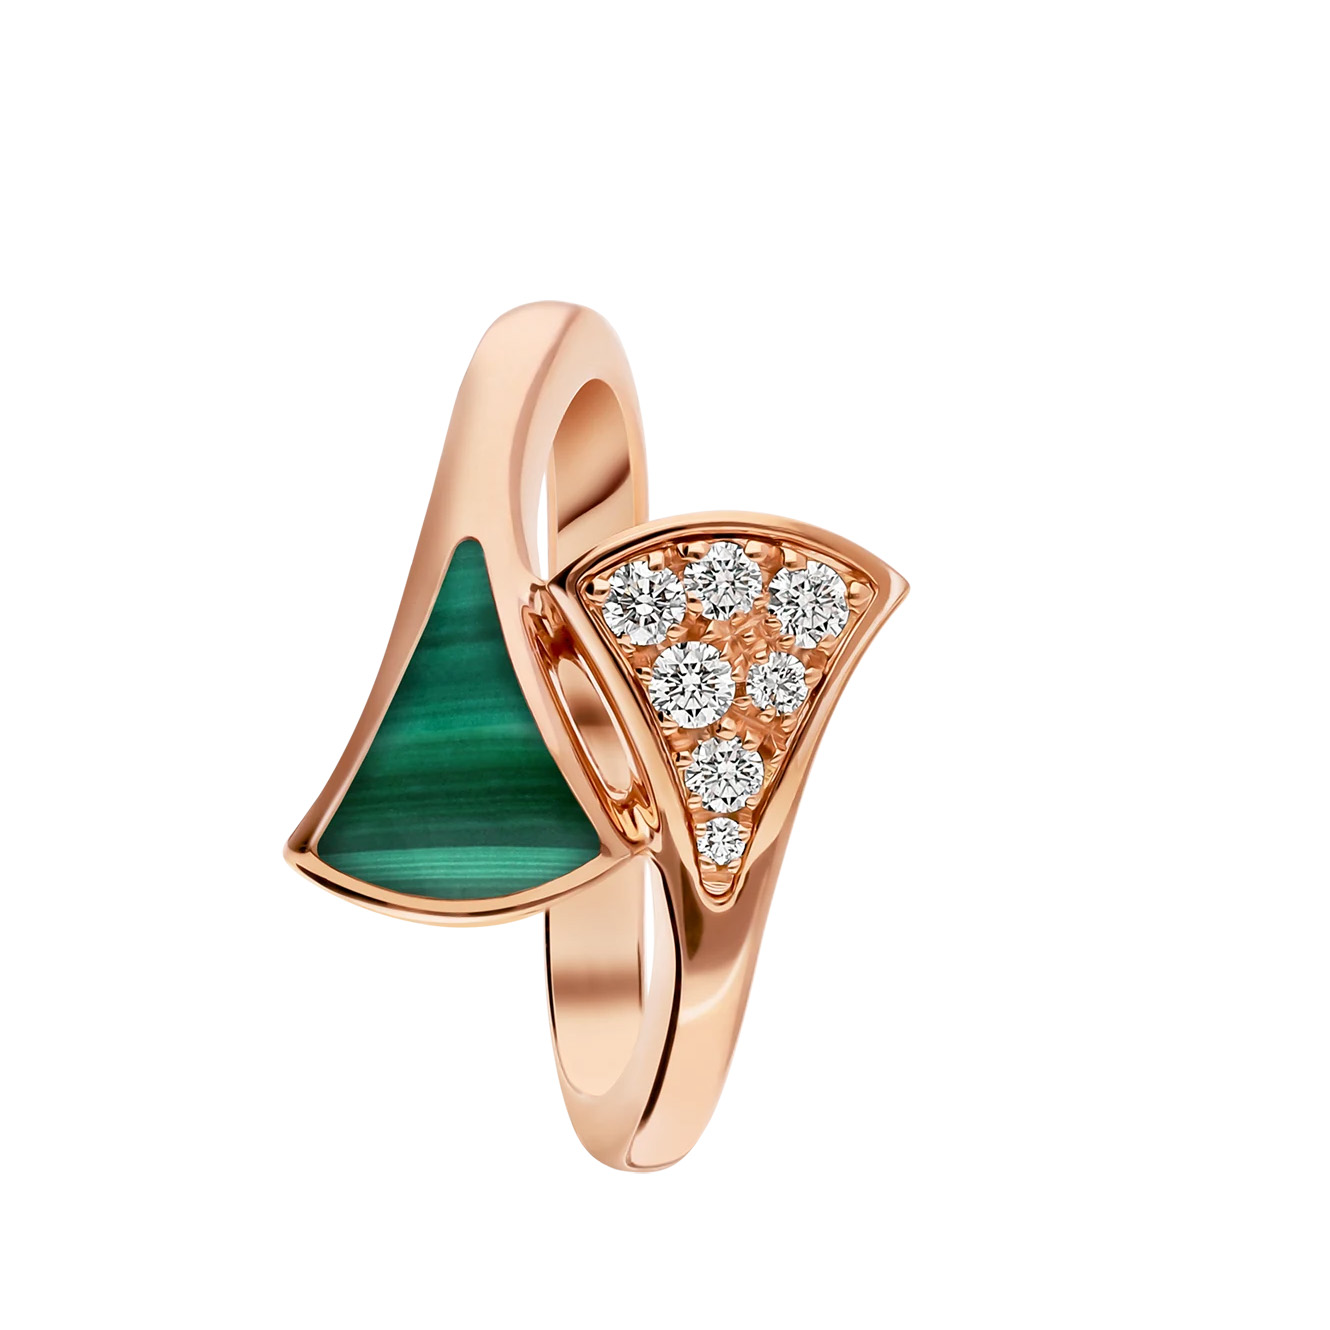 Wholesale 18k rose gold ring set OEM/ODM Jewelry with malachite element and pavé diamonds 20 years experience in OEM jewelry